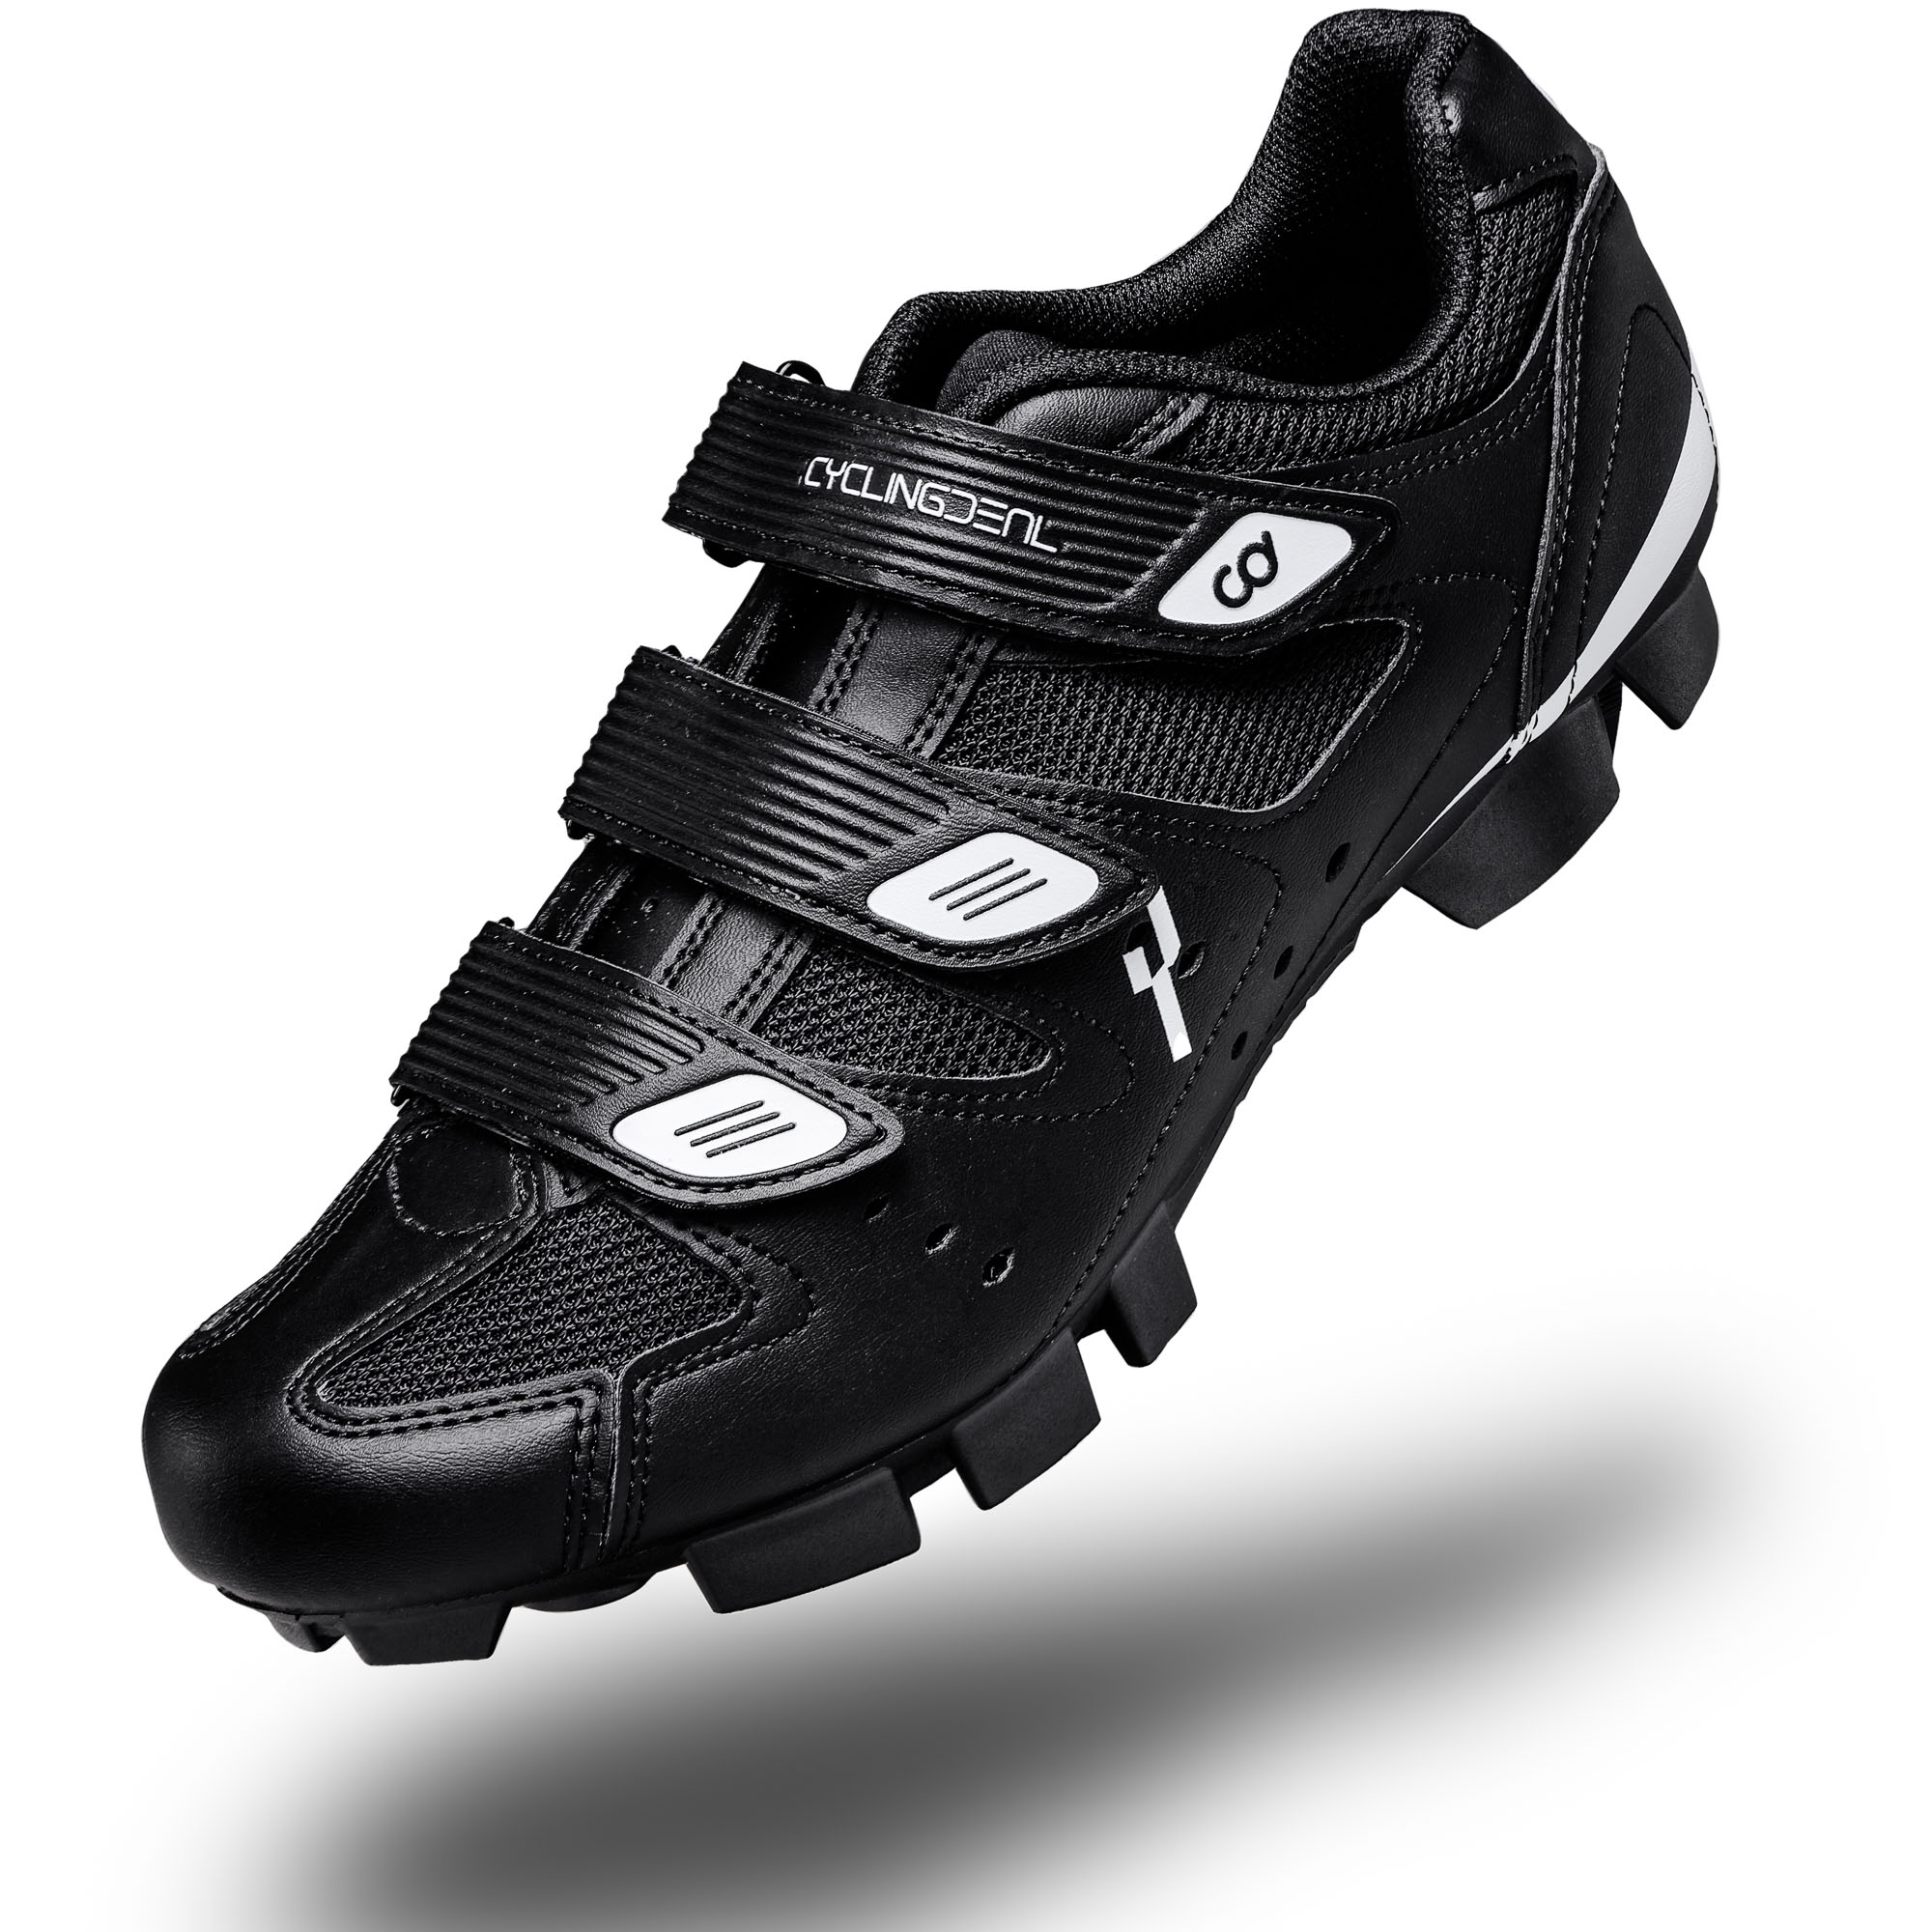 CyclingDeal Mountain Bicycle Bike Men's MTB Cycling Shoes Black Compatible with SHIMANO SPD and CrankBrothers Cleats | Size 40